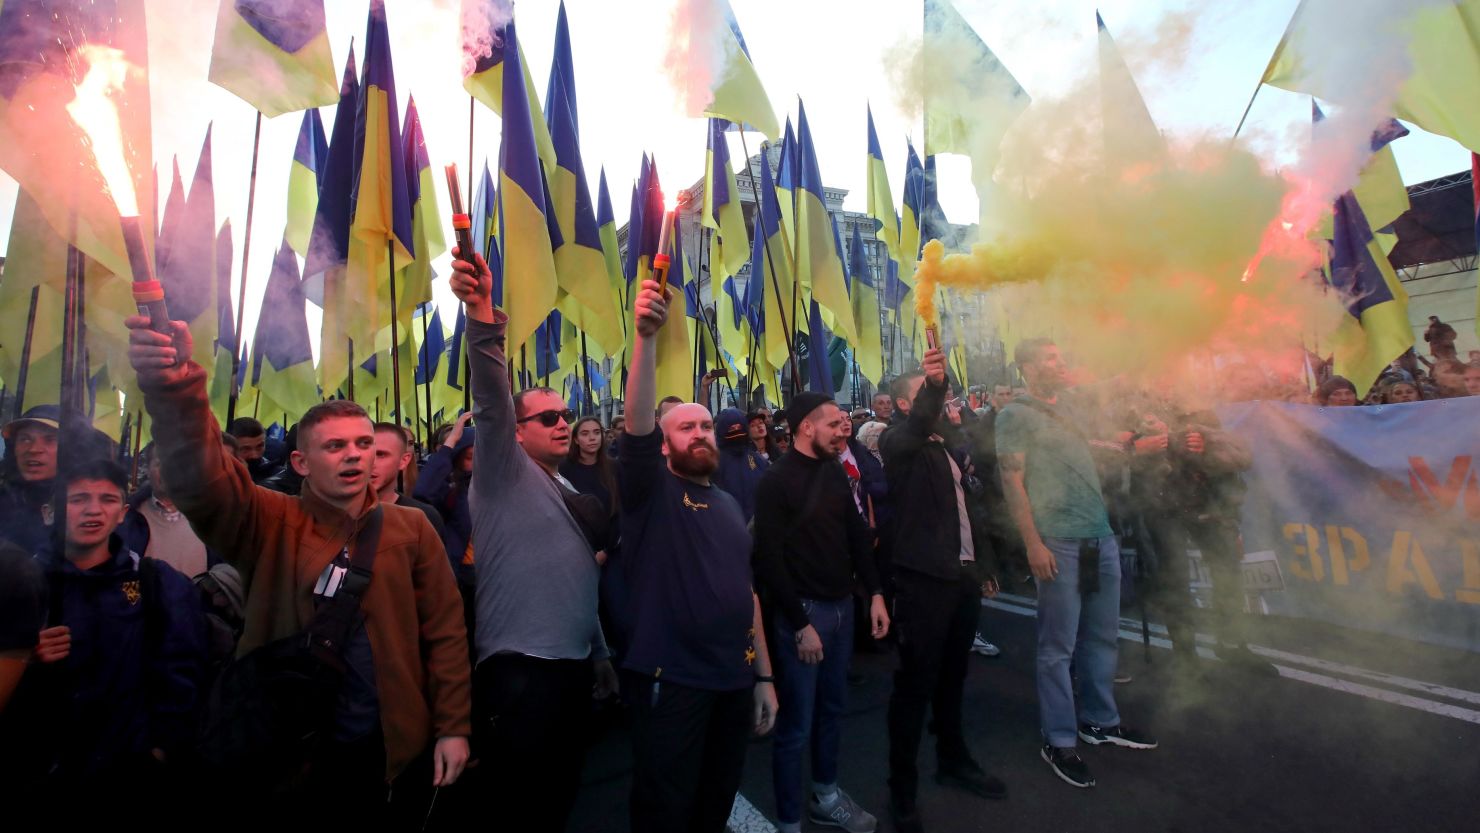 Demonstrators light smoke flares as they march in central Kiev.